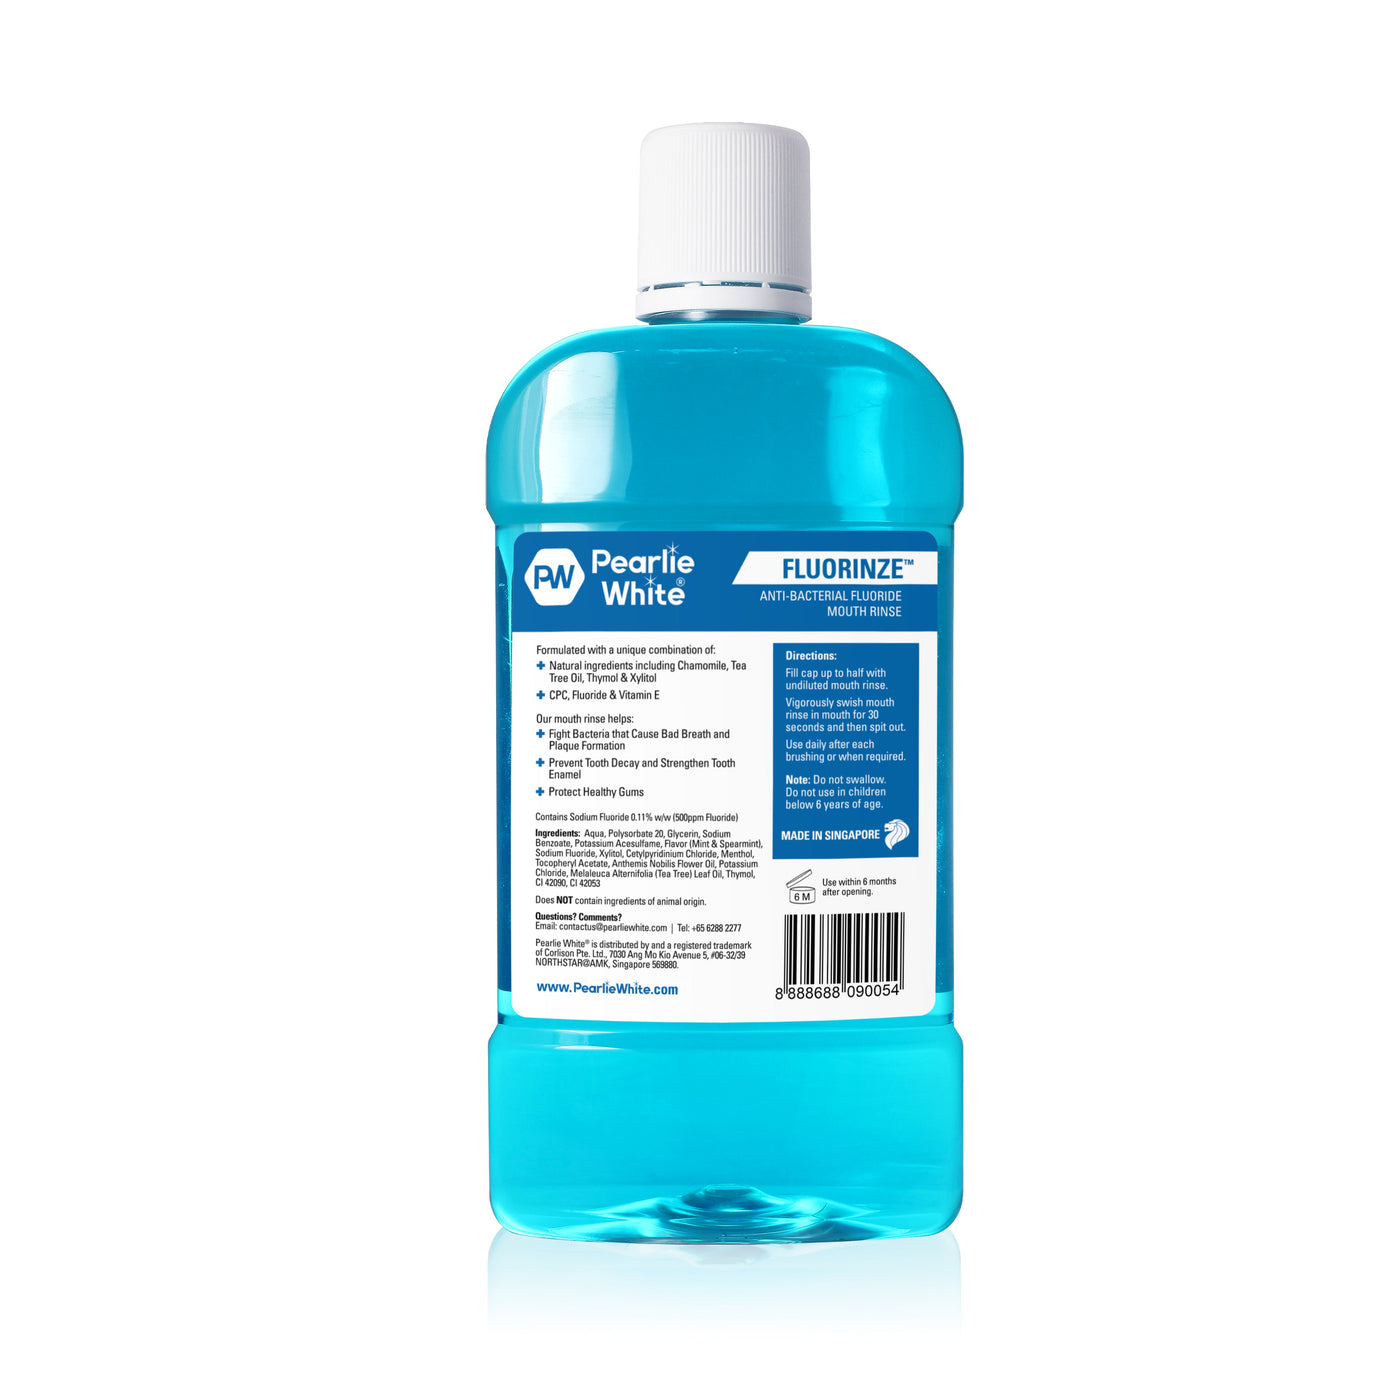 Pearlie White Fluorinze Antibacterial Fluoride Mouth Rinse 750ml